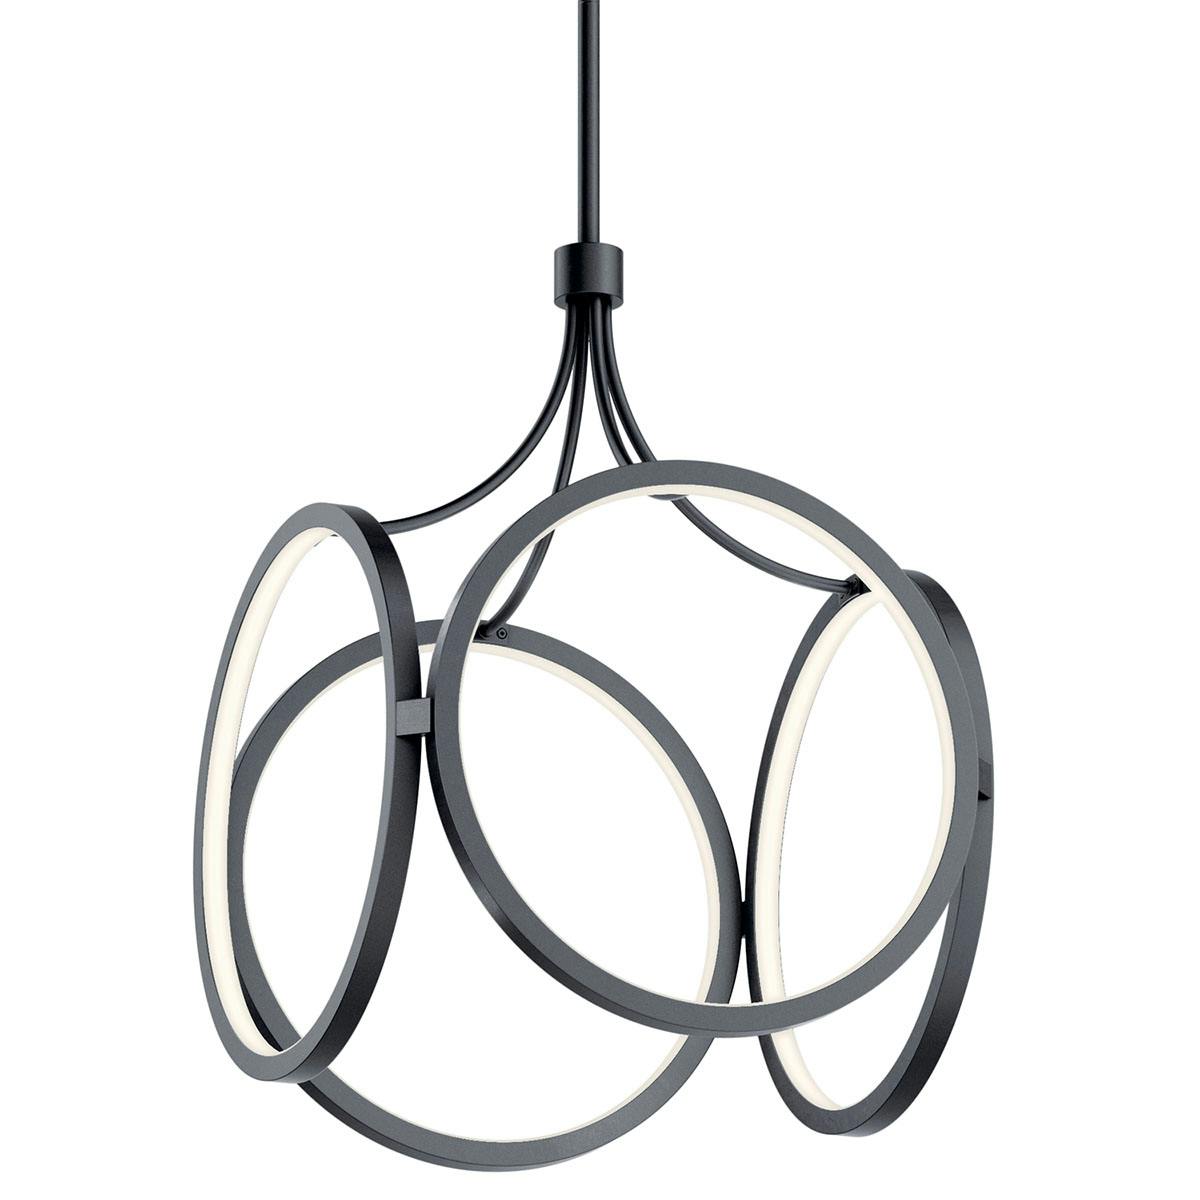 Ciri 19.75" Small LED Pendant Black without the canopy on a white background